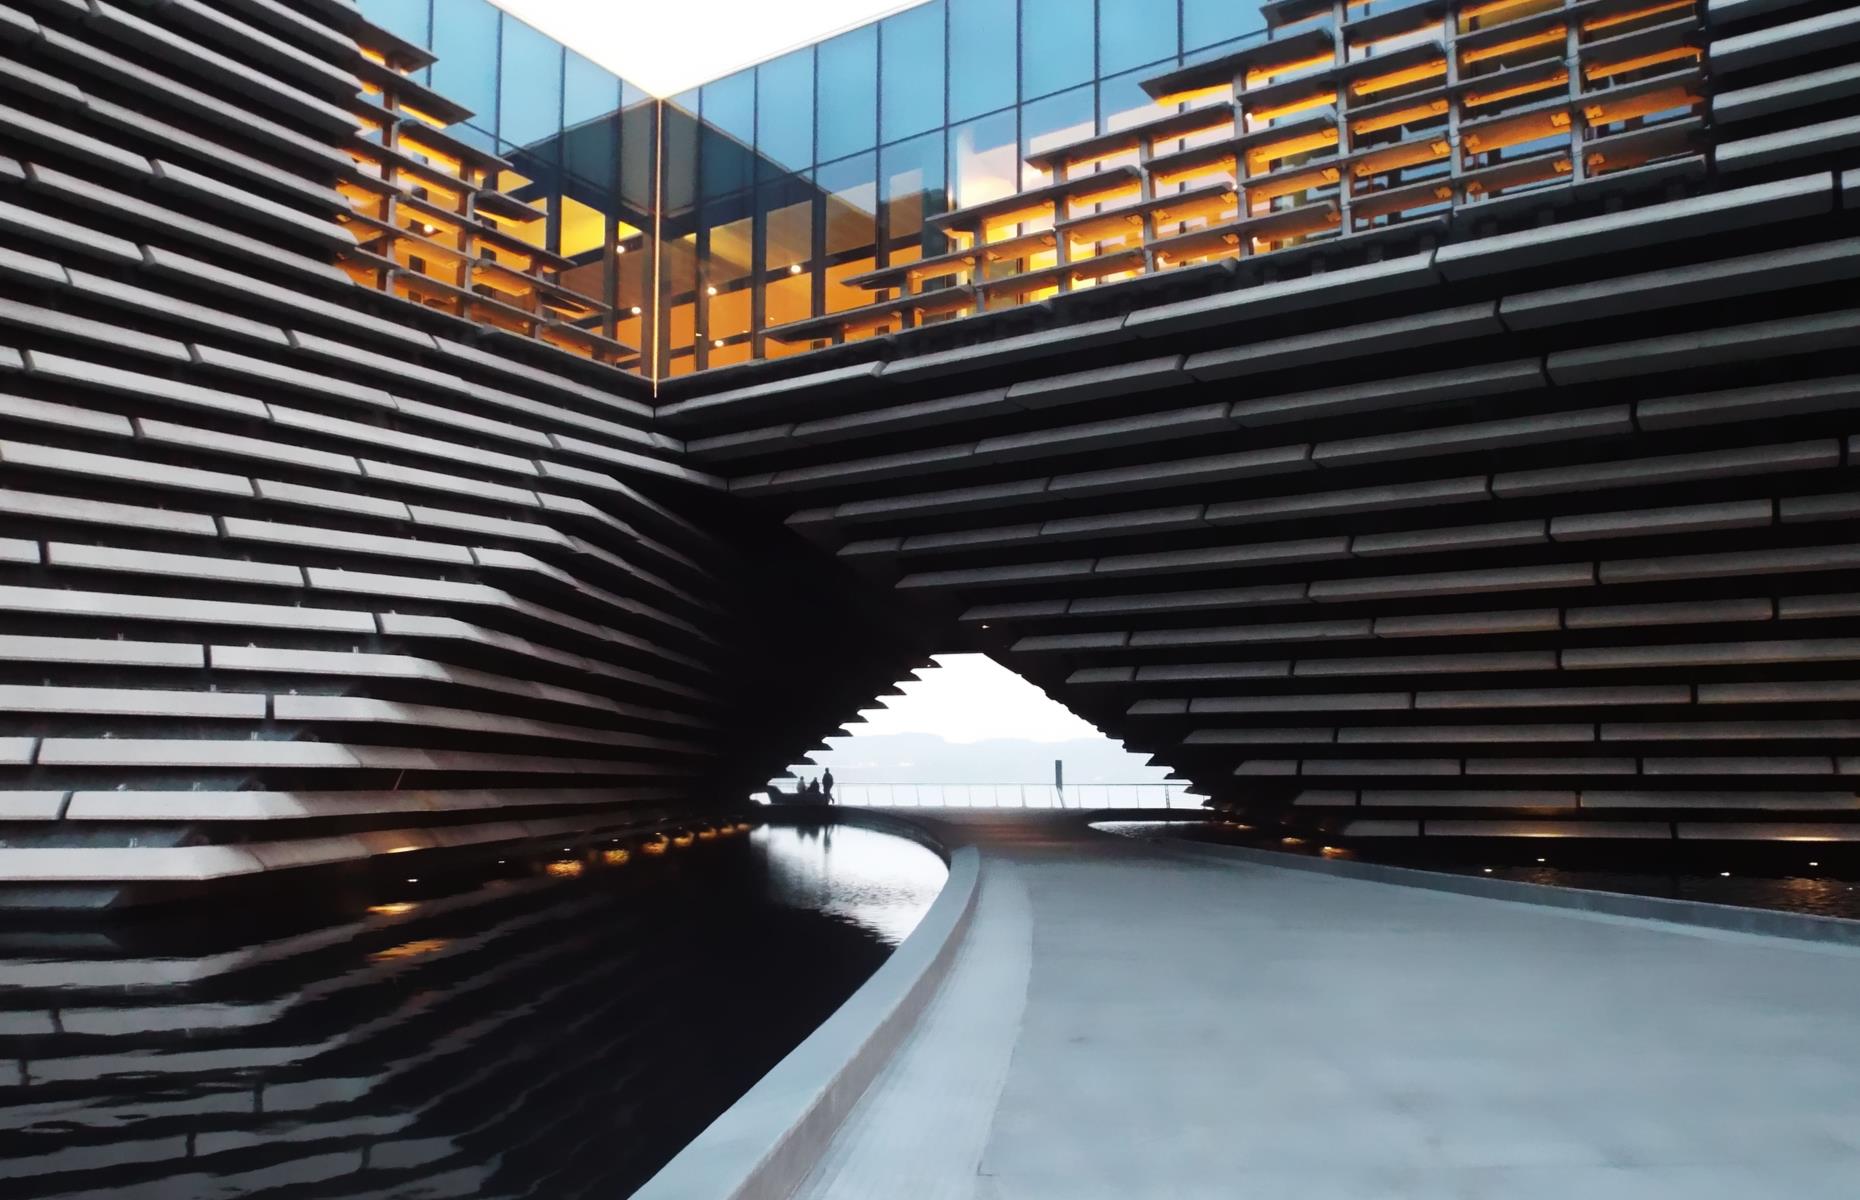 <p>In 2018 <a href="https://www.loveexploring.com/news/72322/things-to-do-in-dundee-scotlands-bestkept-secret">Dundee</a> emerged as Scotland’s must-visit arts and design destination after the V&A Museum of Design opened as part of a £1 billion ($1.4bn) waterfront regeneration. Situated right next to RRS Discovery, the ship that took Shackleton and Scott to Antarctica, the striking V&A boasts plenty of exciting displays including the upcoming Night Fever exhibition (opens May 2021) which explores how design, music and technology meet on the dancefloors of the world's famous nightclubs.</p>